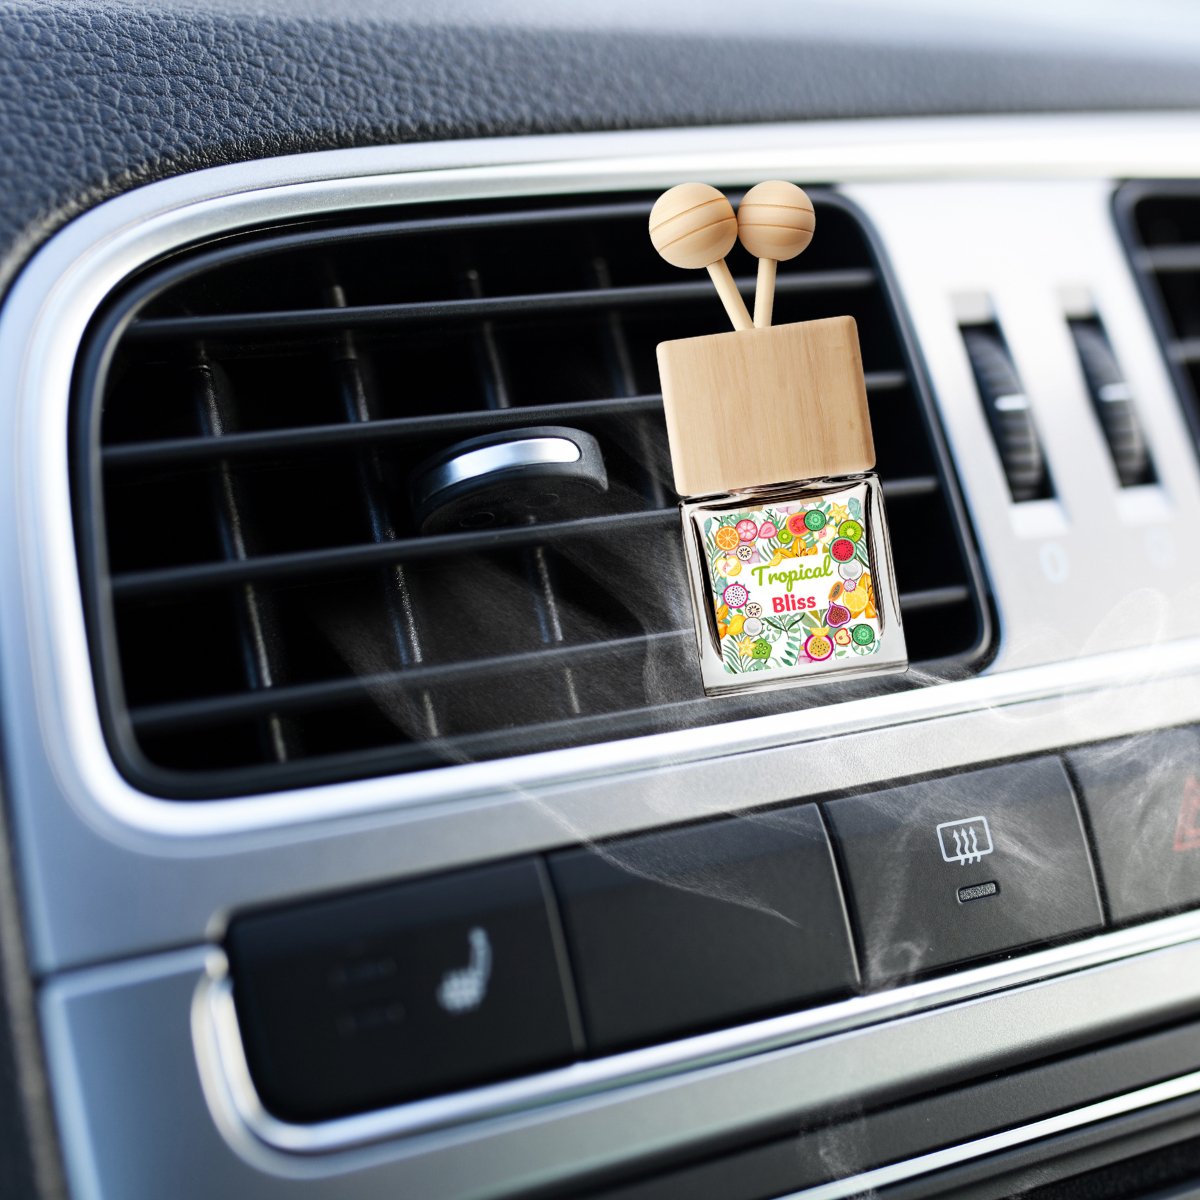 Tropical Bliss Scented Car Vent Air Freshener - Scents More